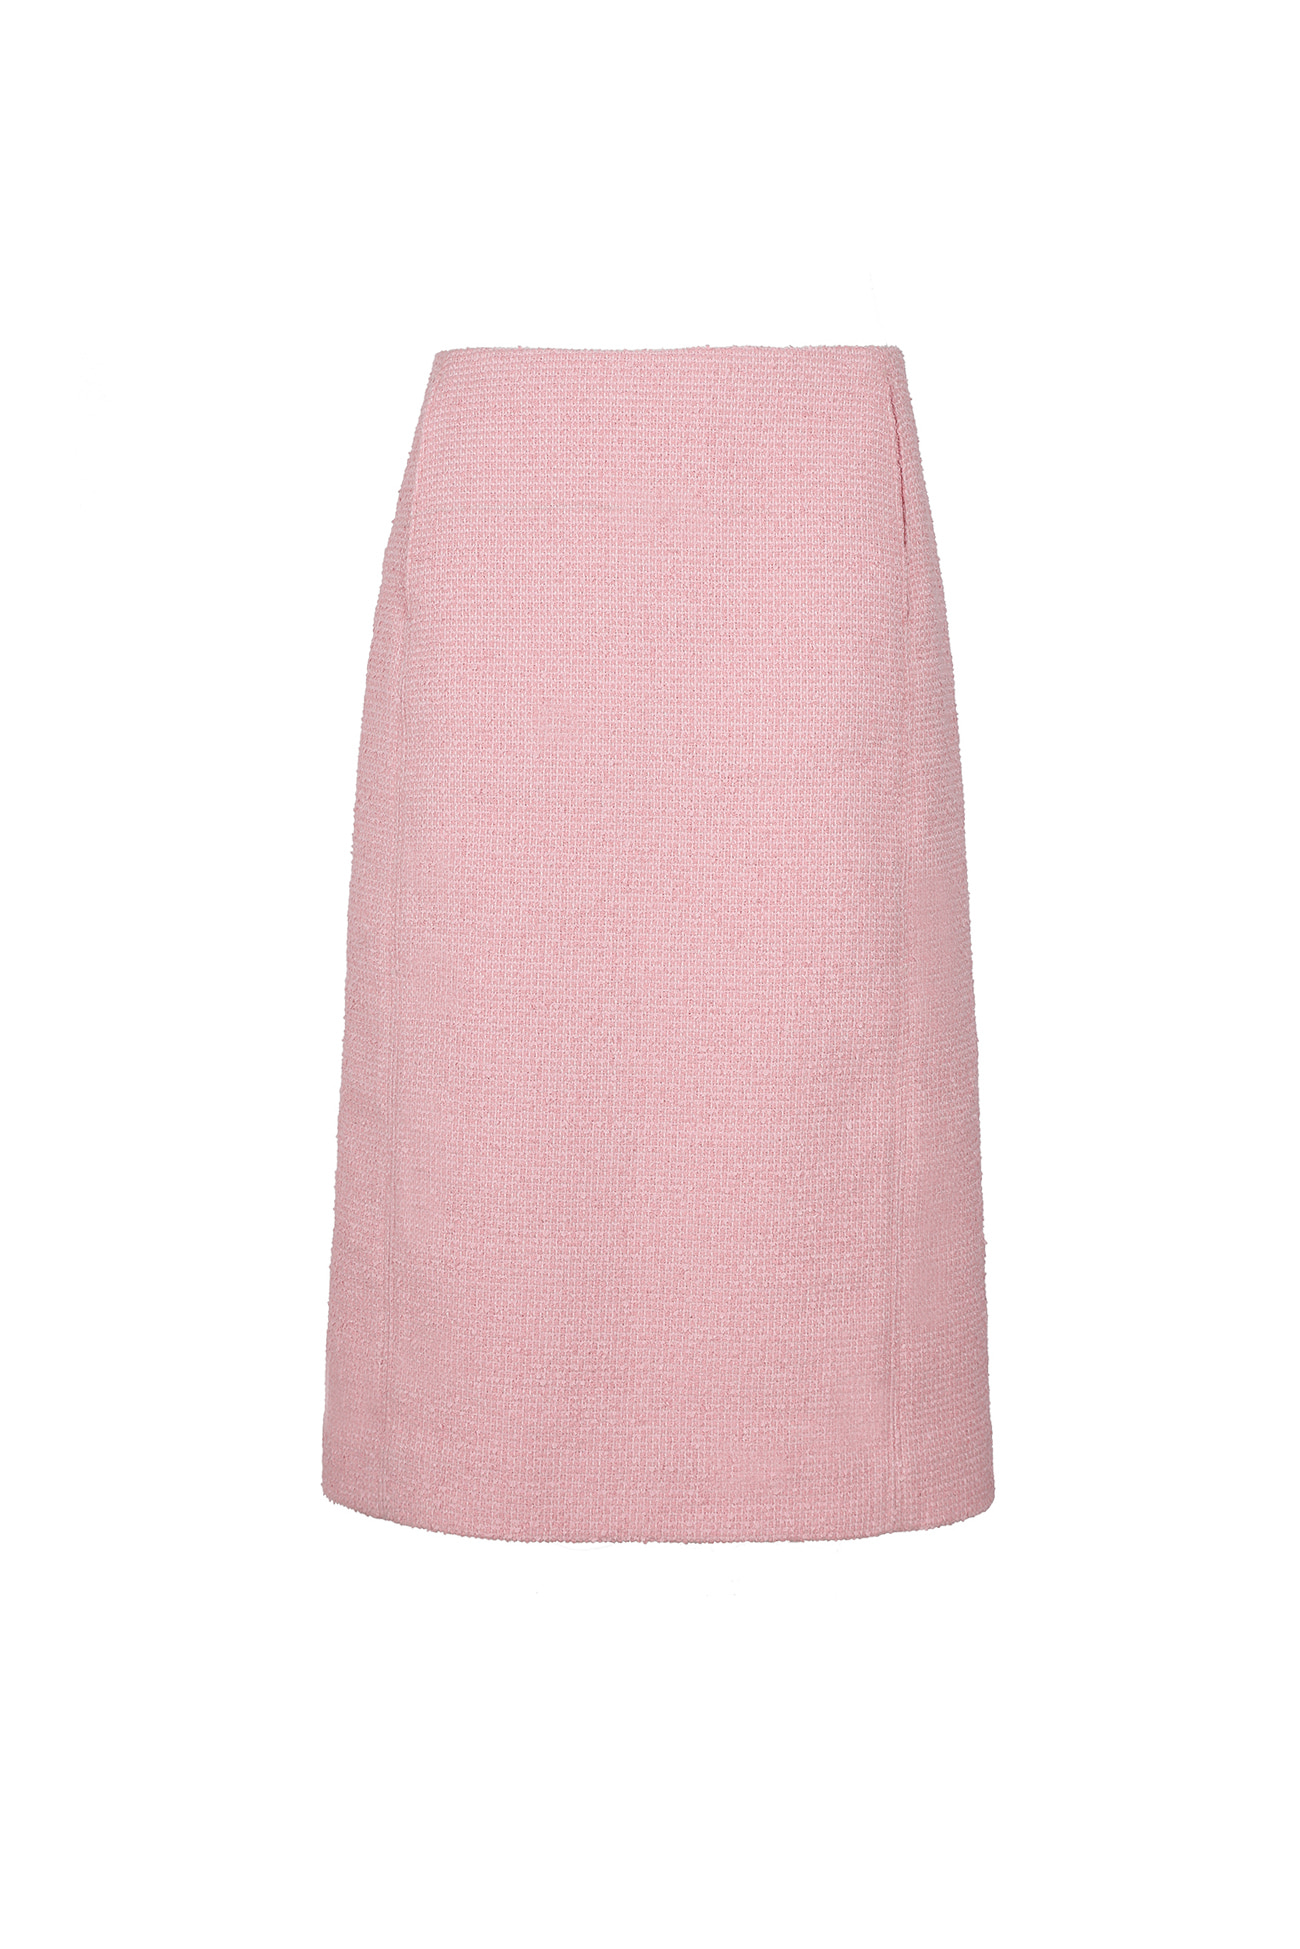 HIGH QUALITY LINE - PINK TWEED BOUCLE SKIRT